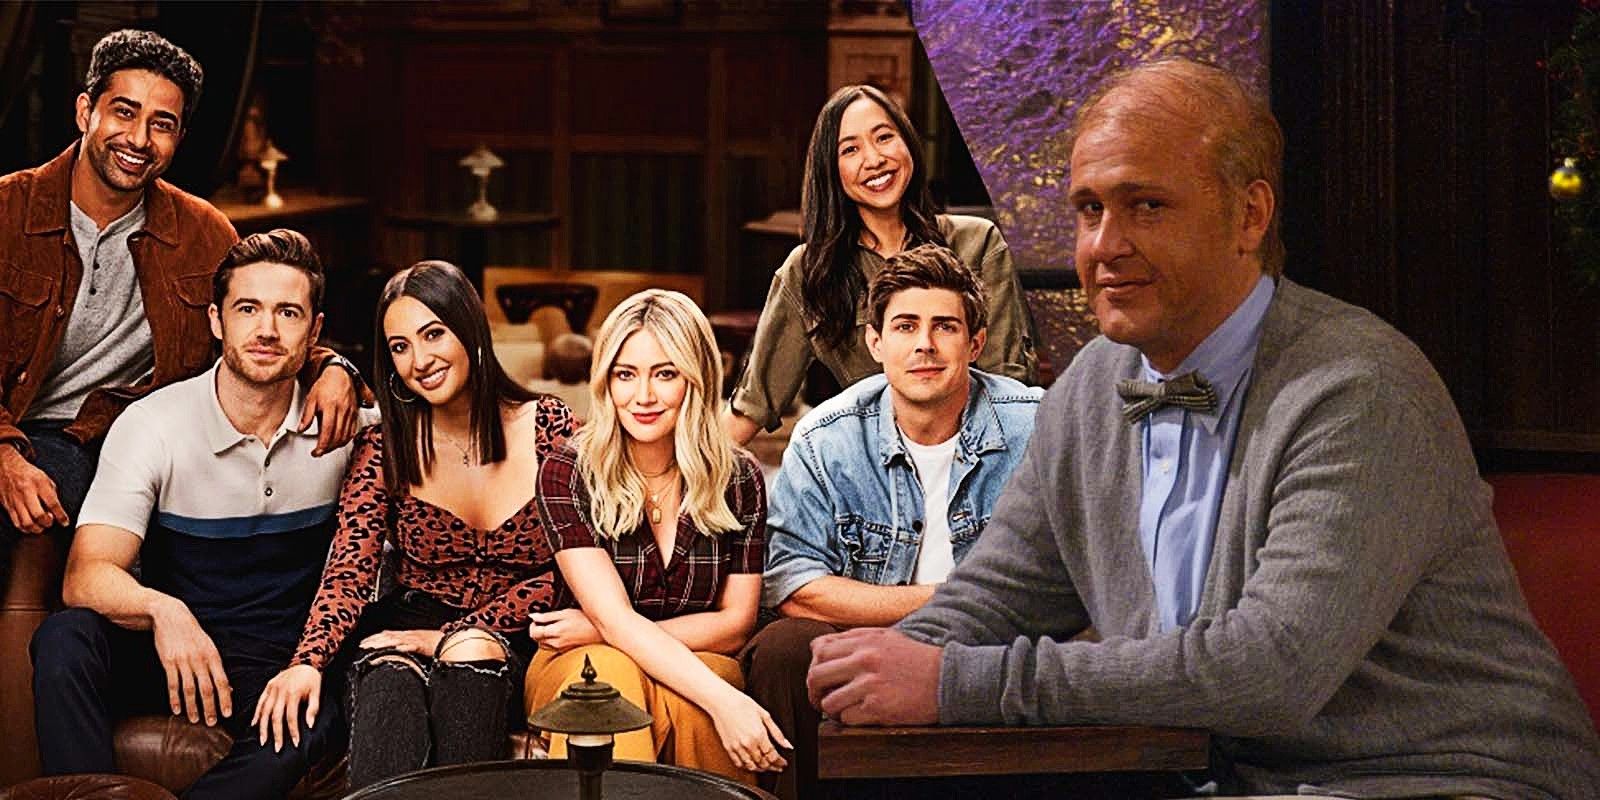 Suraj Sharma as Sid, Tom Ainsley as Charlie, Francia Raisa as Valentina, Hilary Duff as Sophie, Christopher Lowell as Jesse, Tien Tran as Ellen in How I Met Your Father and Jason Segel as Marshall in How I Met Your Mother.